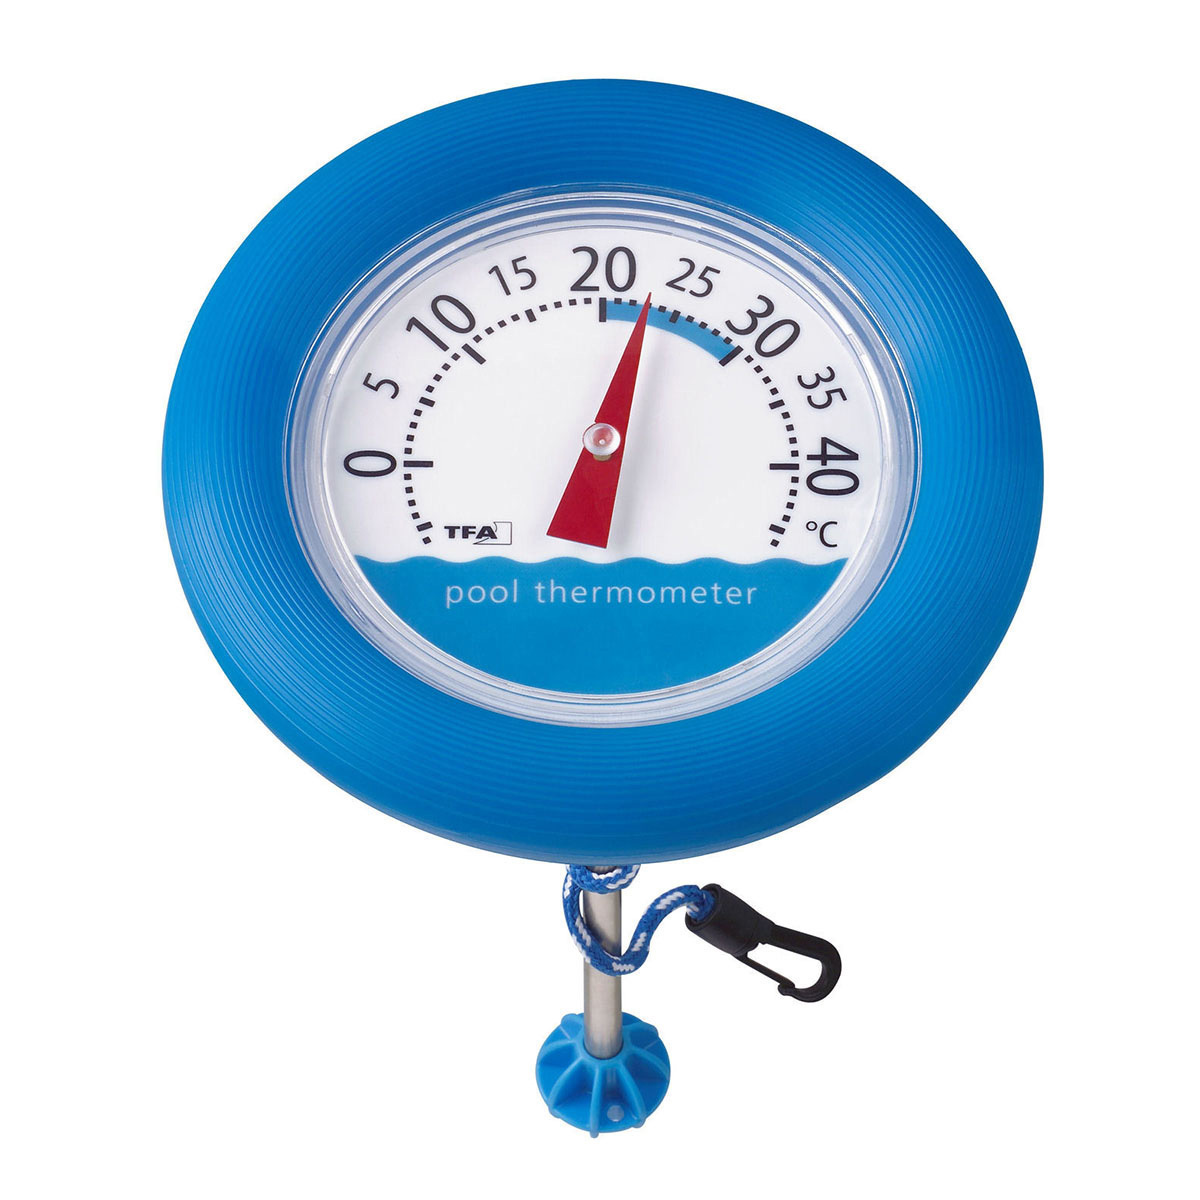 40-2007-analoges-schwimmbadthermometer-poolwatch-1200x1200px.jpg